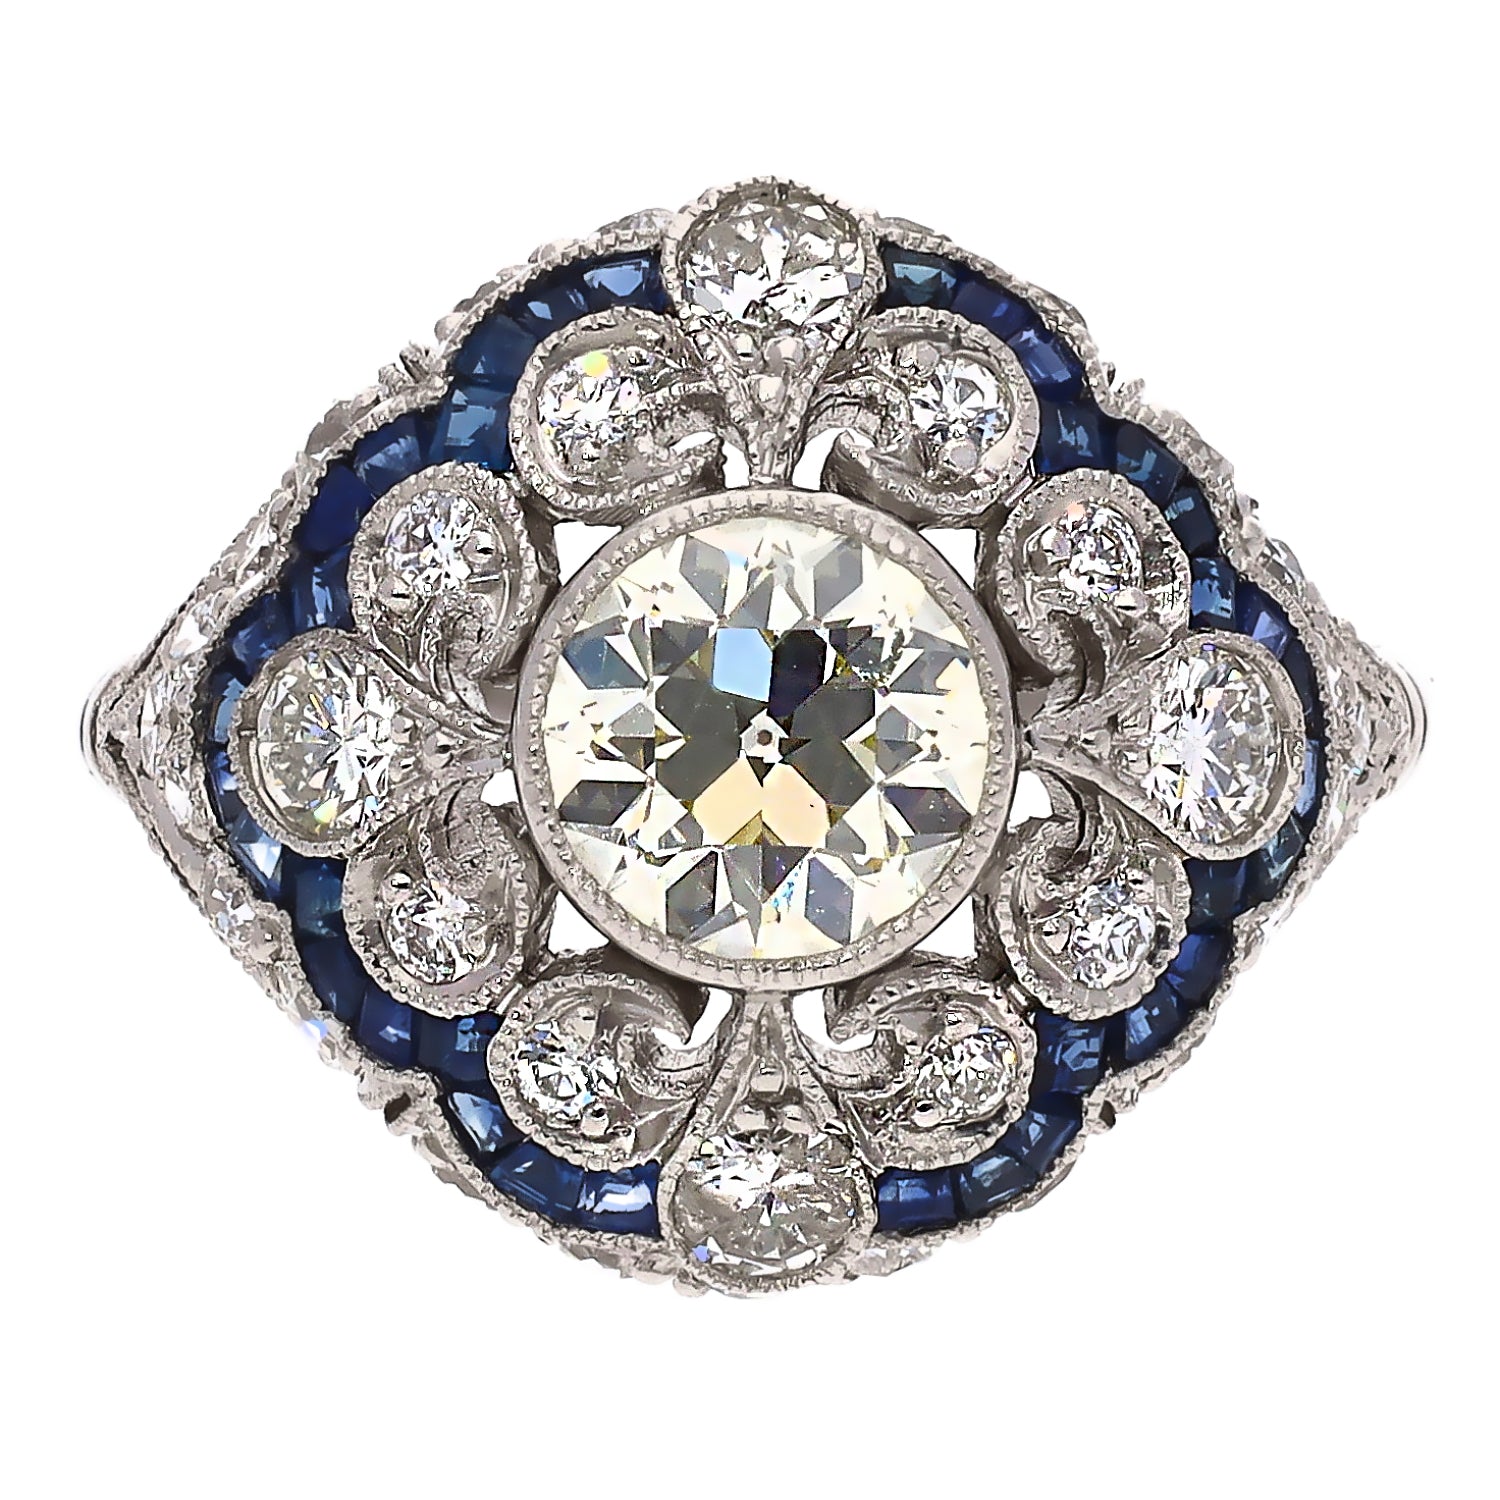 Vintage Platinum Euro Cut Diamond and French Cut Sapphire Ring